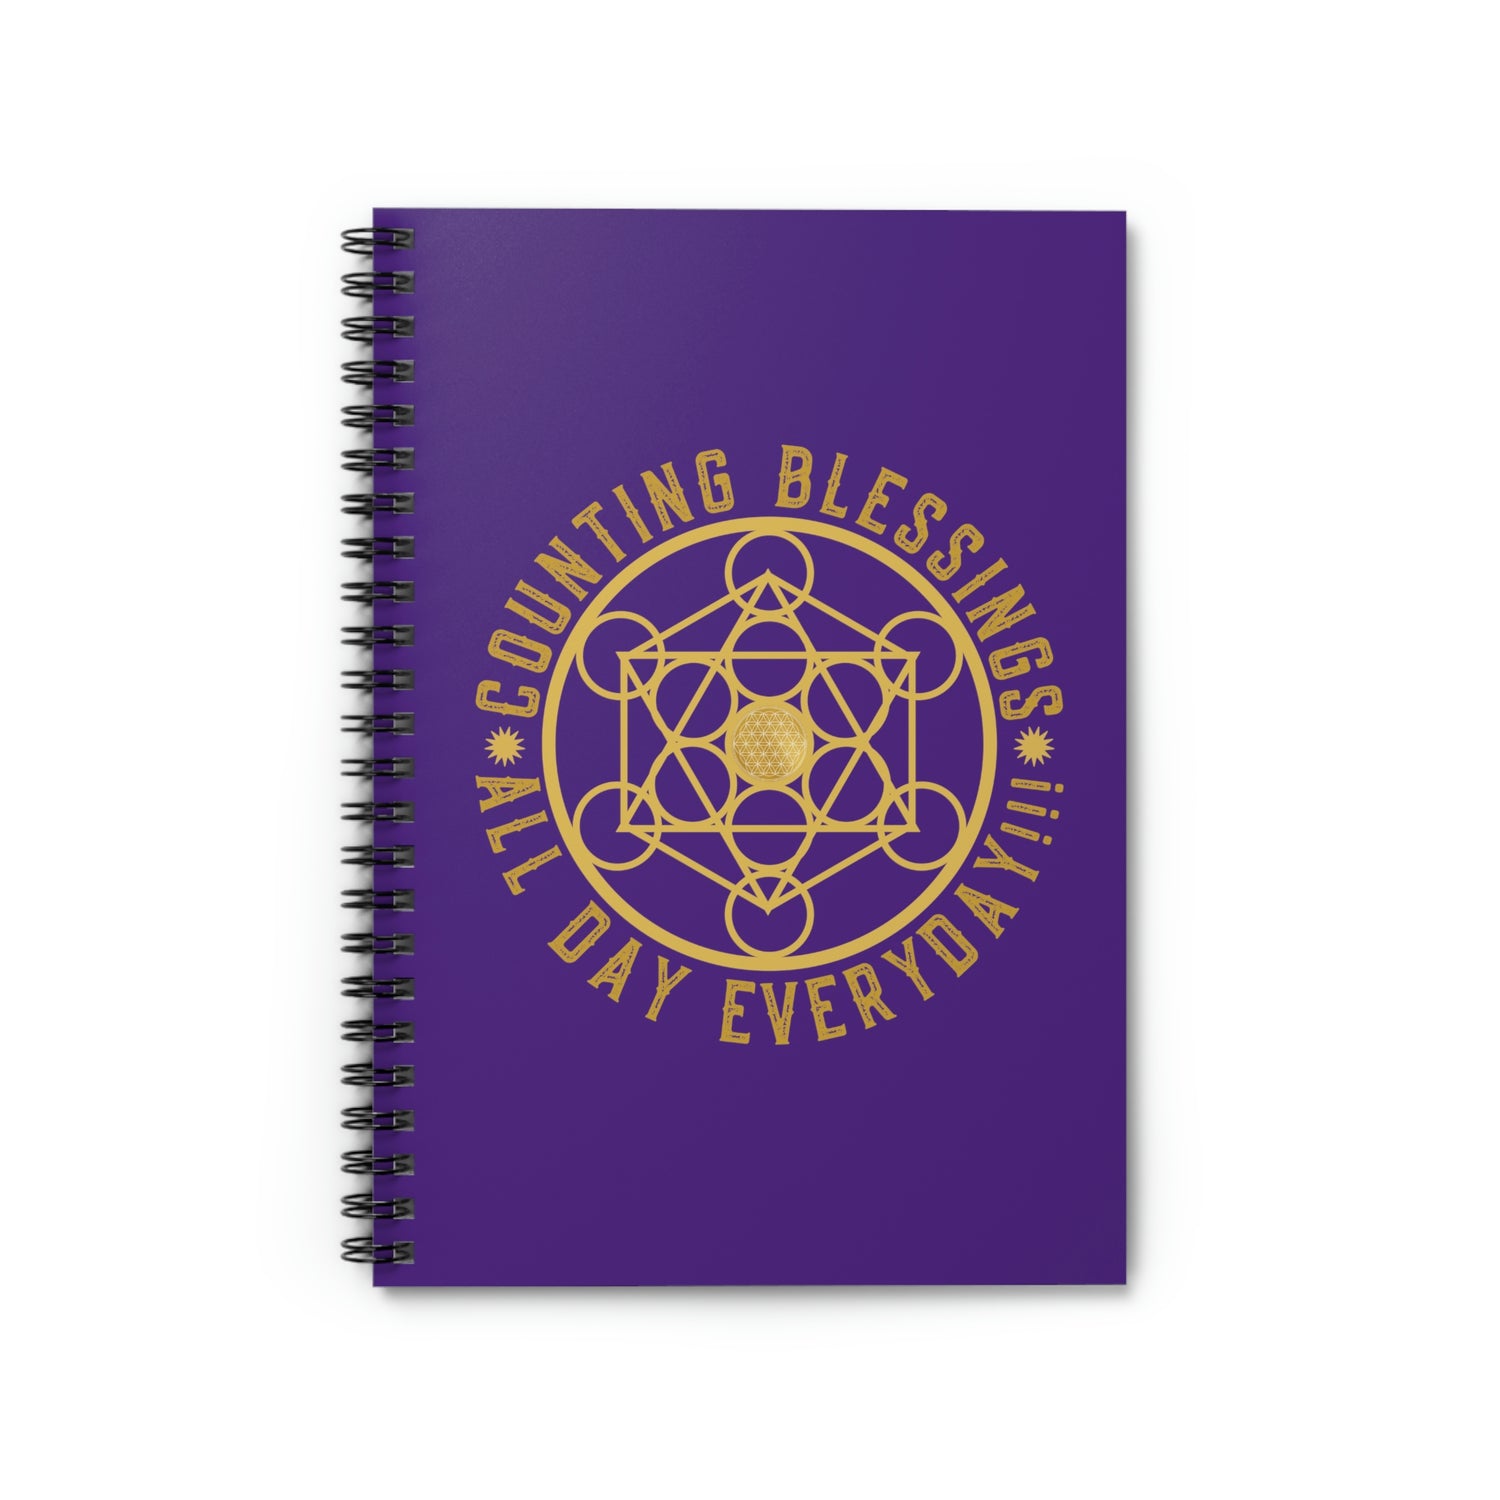 COUNTING BLESSINGS ALL DAY EVERYDAY!!! - Spiral Notebook - Ruled Line - Purple